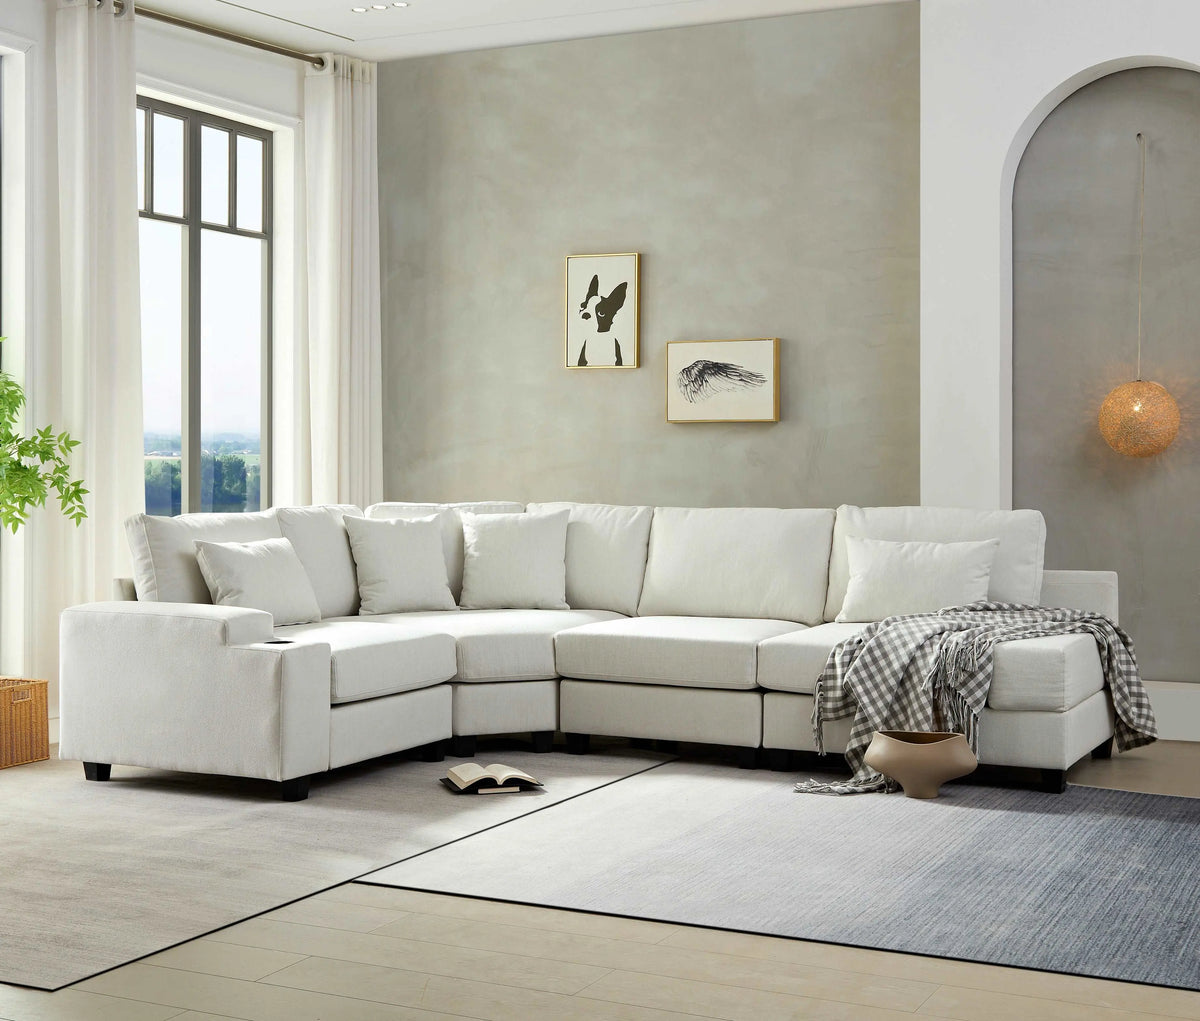 Bellemave 115.4" Stylish Modular Sofa Sectional with Polyester Upholstery with 4 Pillows and 1 Cup Holder